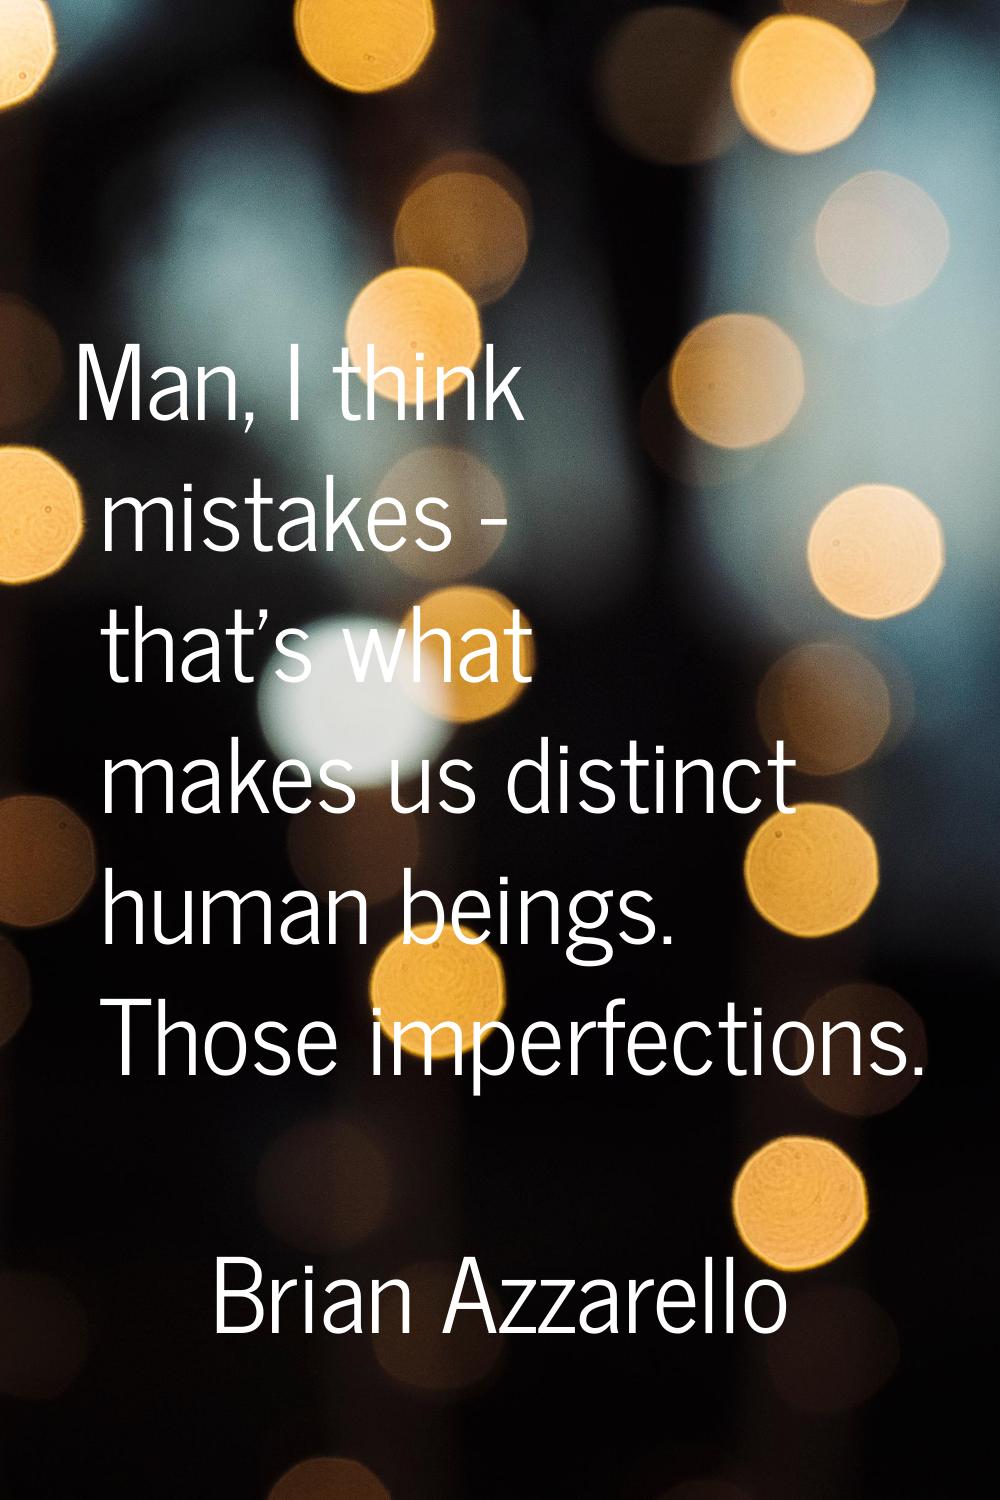 Man, I think mistakes - that's what makes us distinct human beings. Those imperfections.